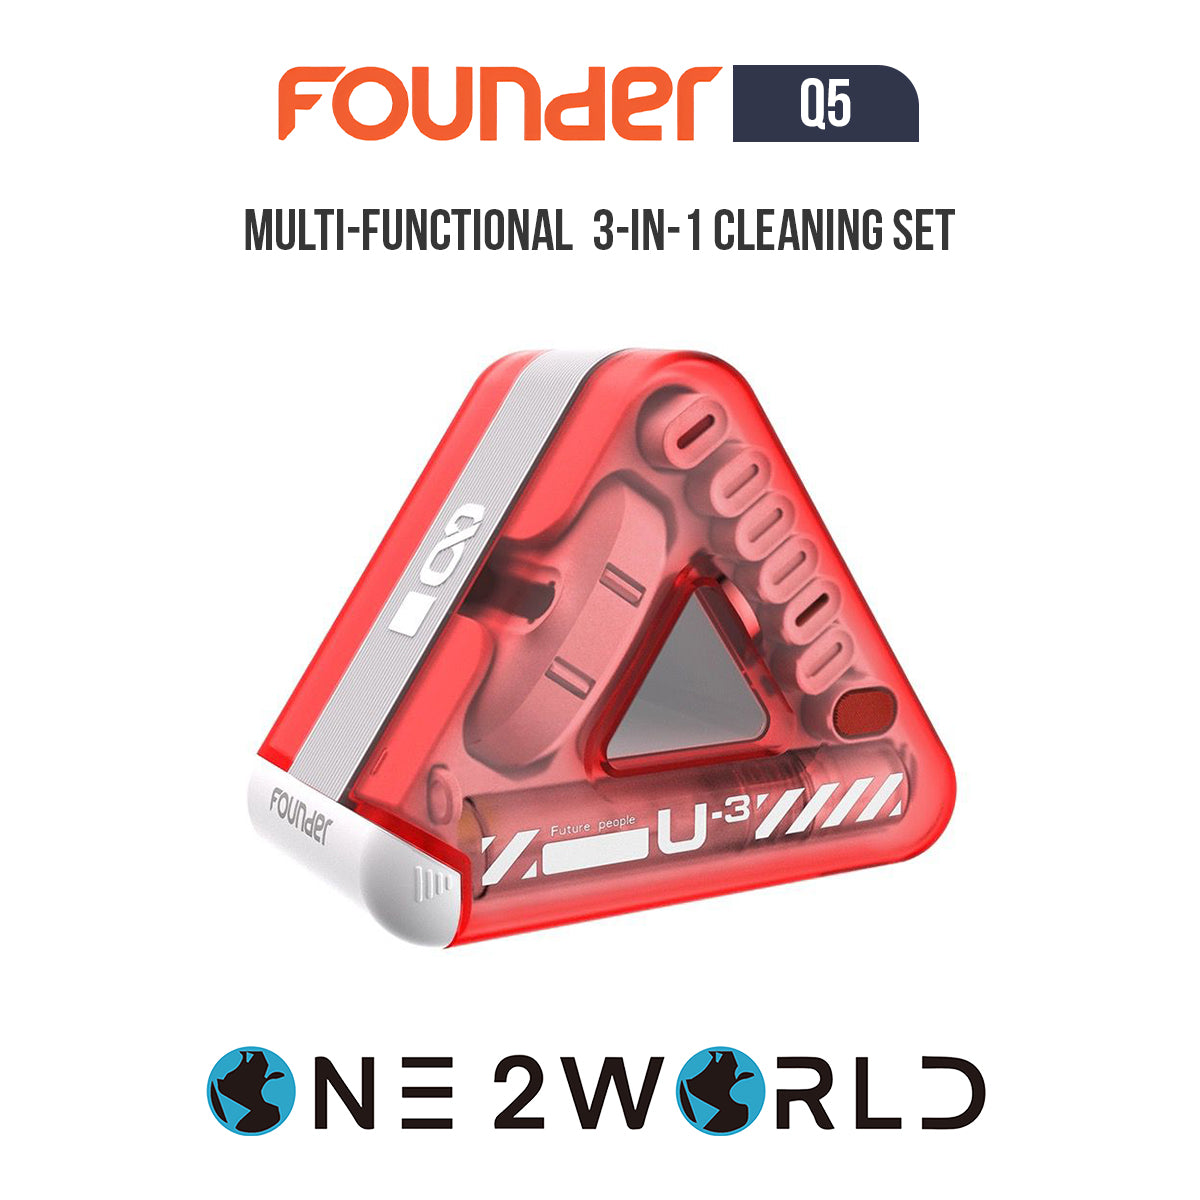 O2W SELECTION FOUNDER Q5 23-in-1 Multi-Functional Cleaning Set